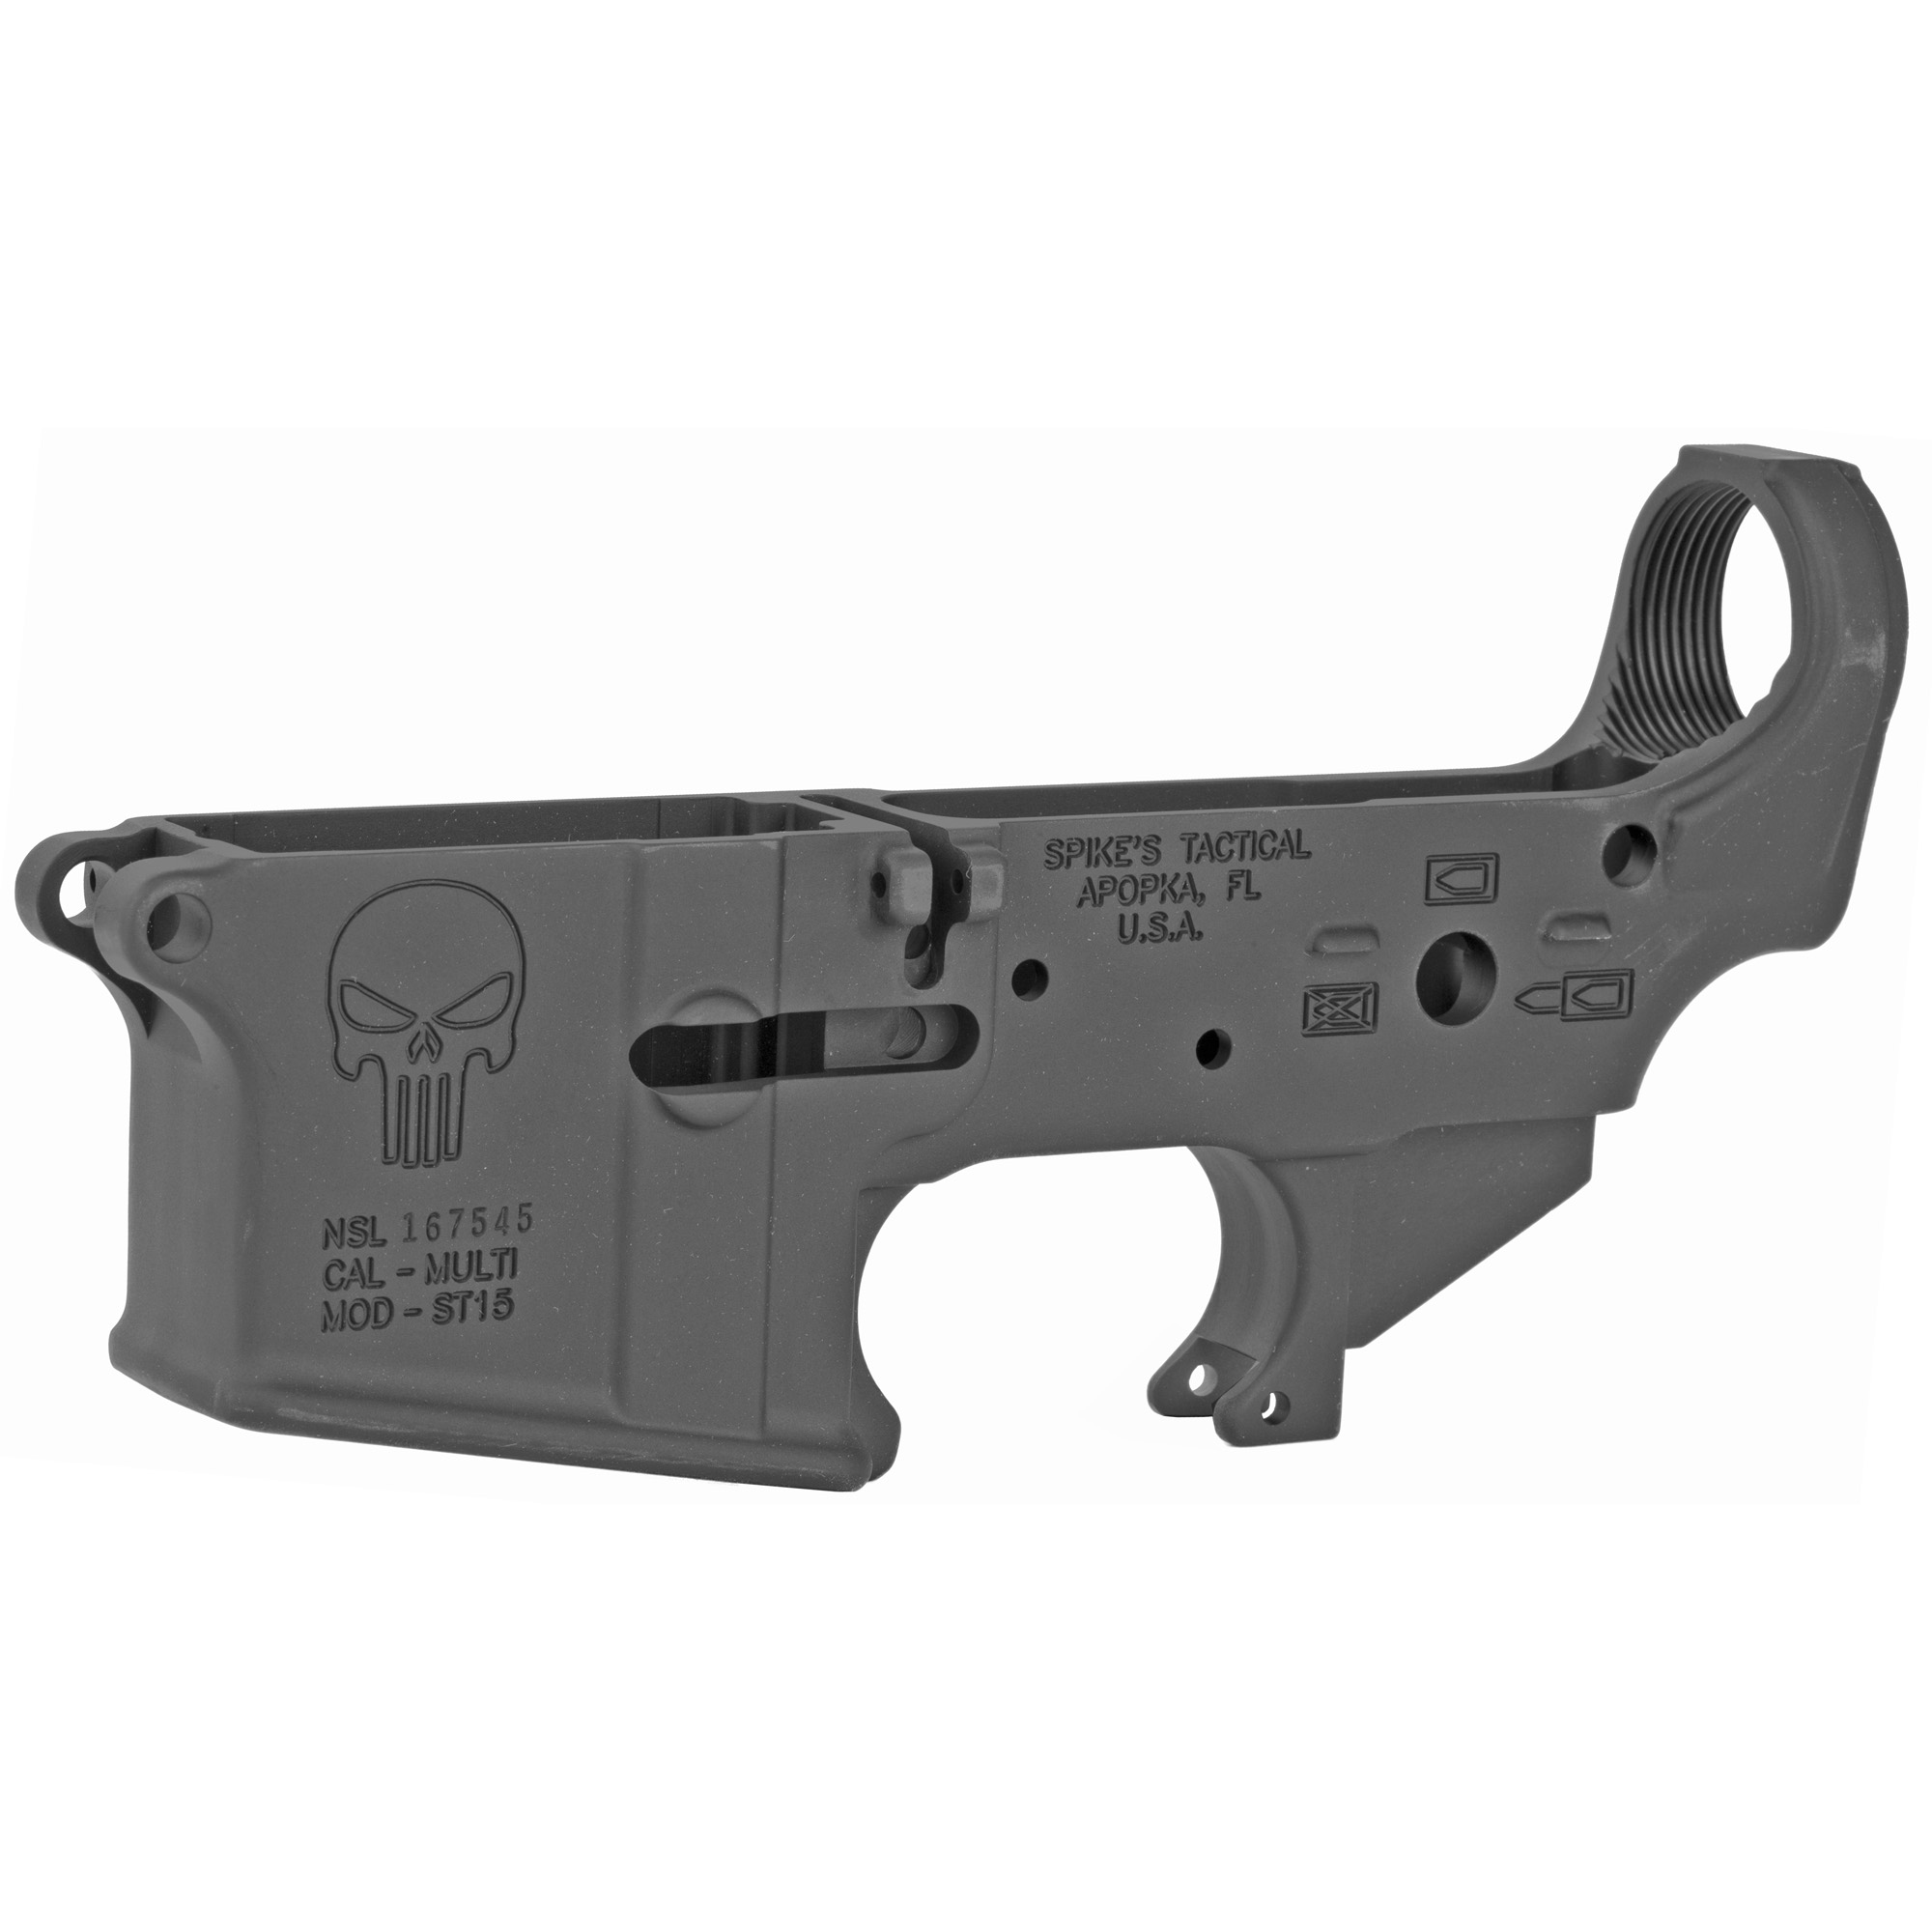 https://cityarsenal.com/product/spikes-tactical-punisher-stripped-lower-receiver-multi-caliber-7075-t6-aluminum-black-anodized-stls015/